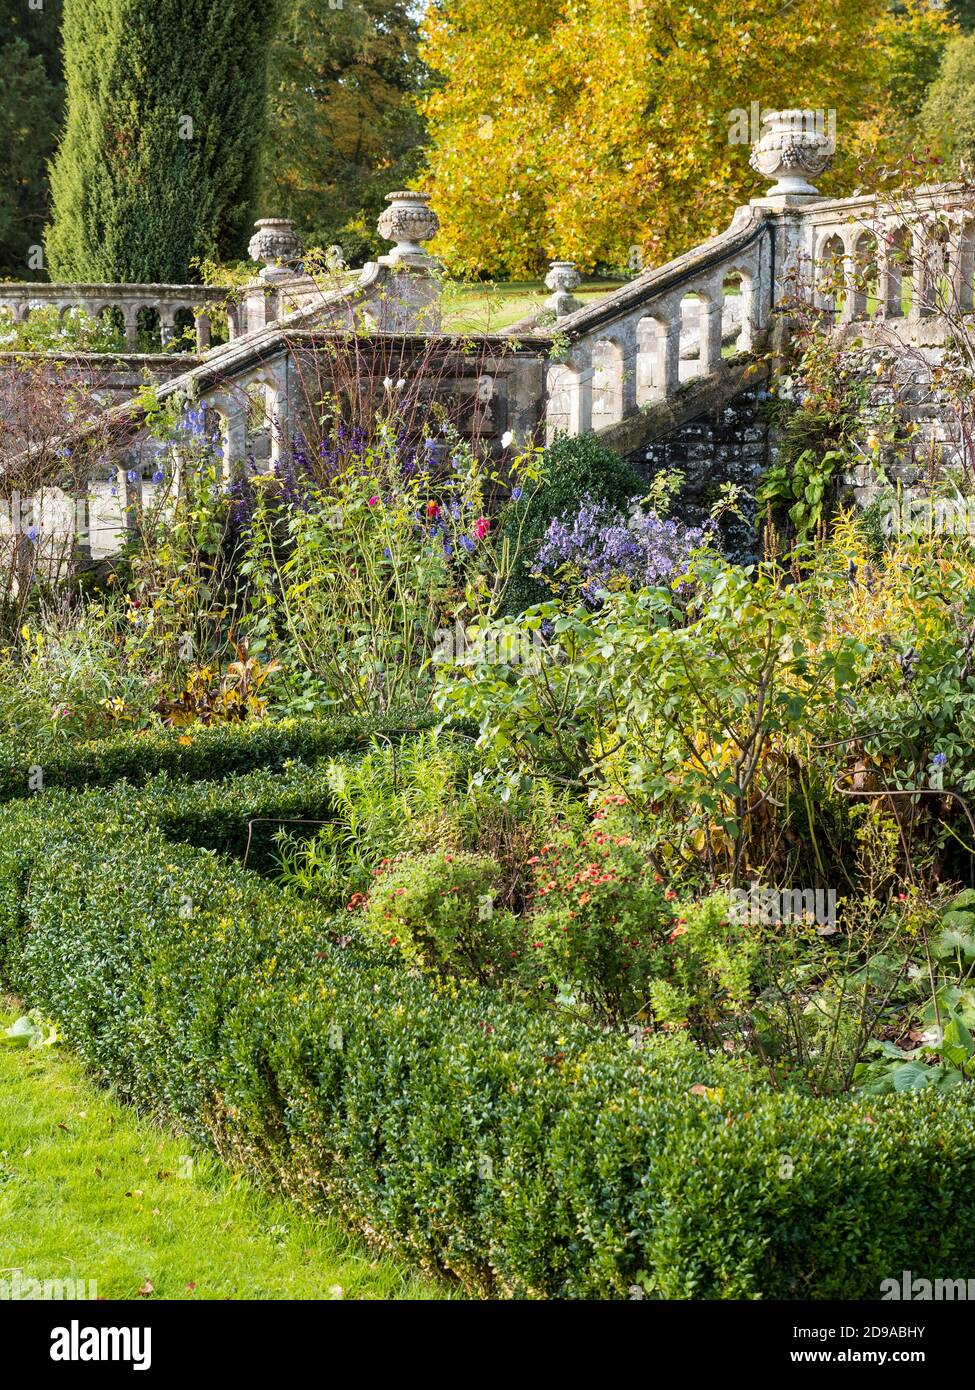 Steps and Flower Beds, Englefield House Gardens, Englefield Estate, Thale, Reading, Berkshire, England, UK, GB. Stock Photo